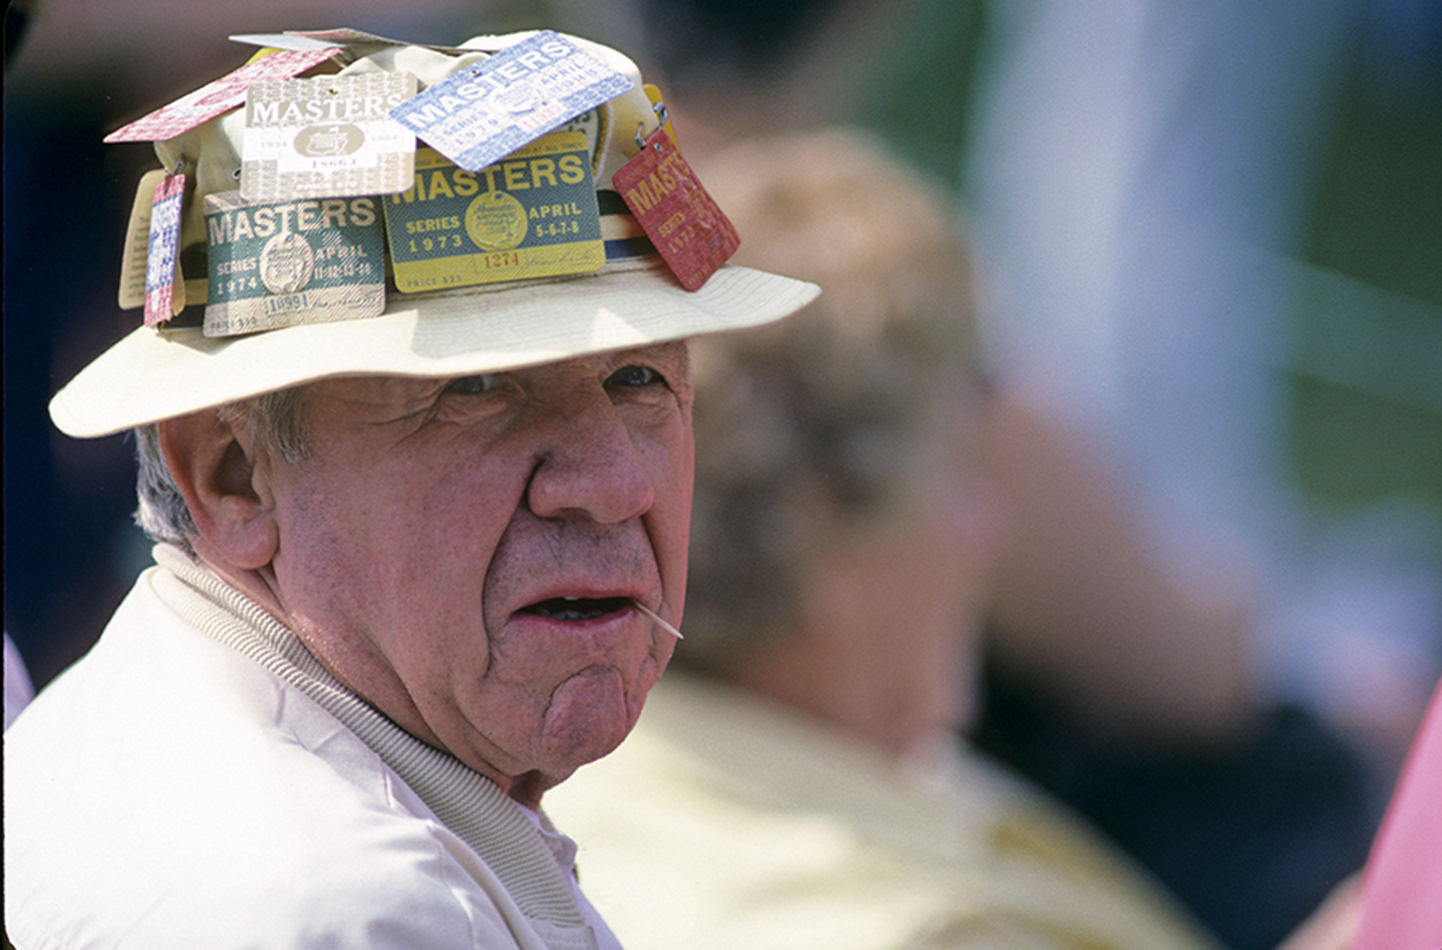 A veteran of many Masters, this patron chews a toothpick at the 1985 Masters (Photograph © Lawrence Levy Photographic Collection. All rights reserved.  Image courtesy of the University of St Andrews Library, [2008-1-1764]).